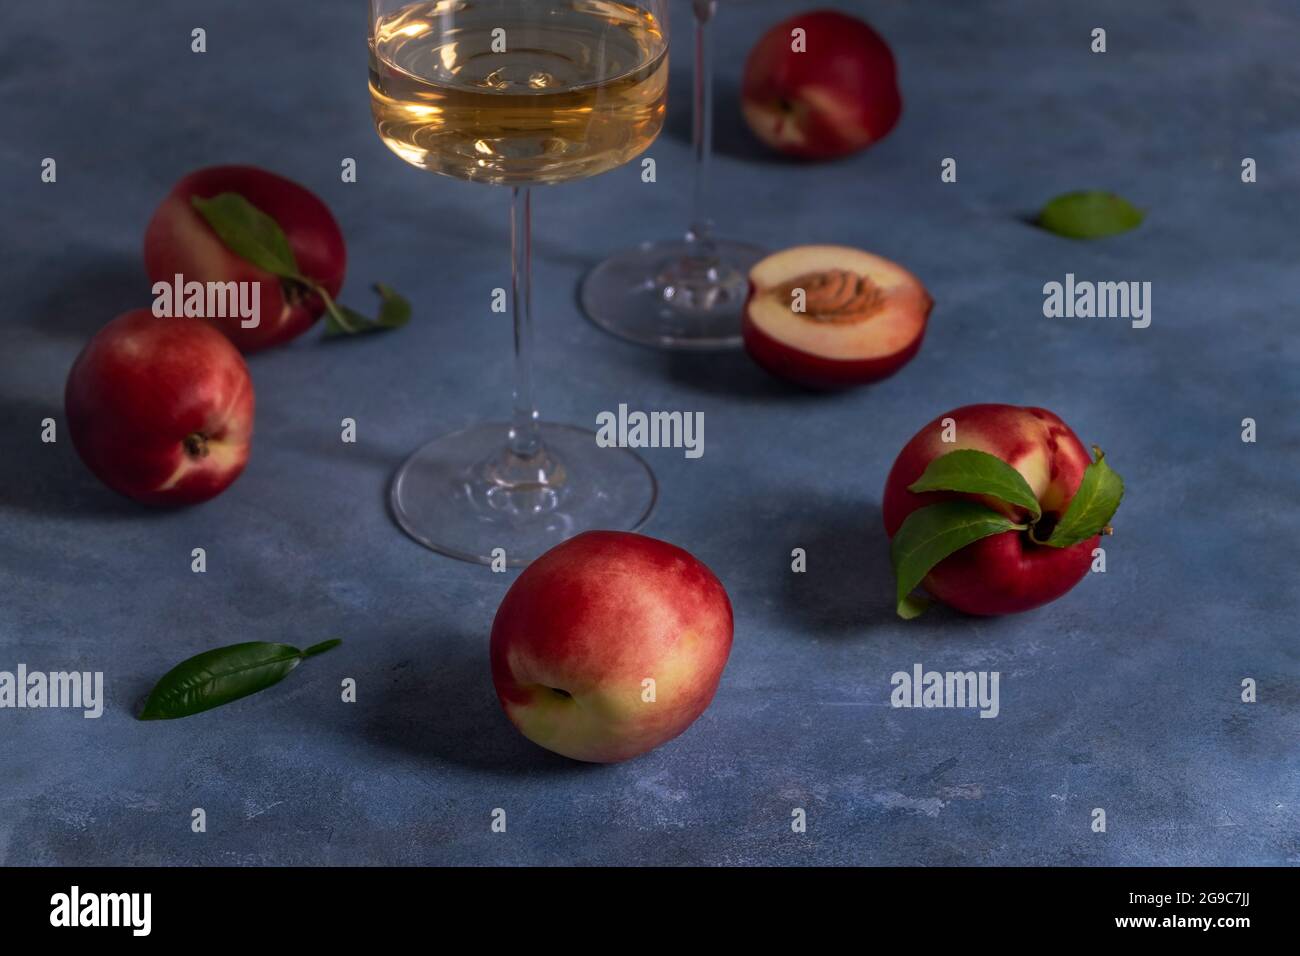 Peaches or nectarines and a glass of wine Stock Photo